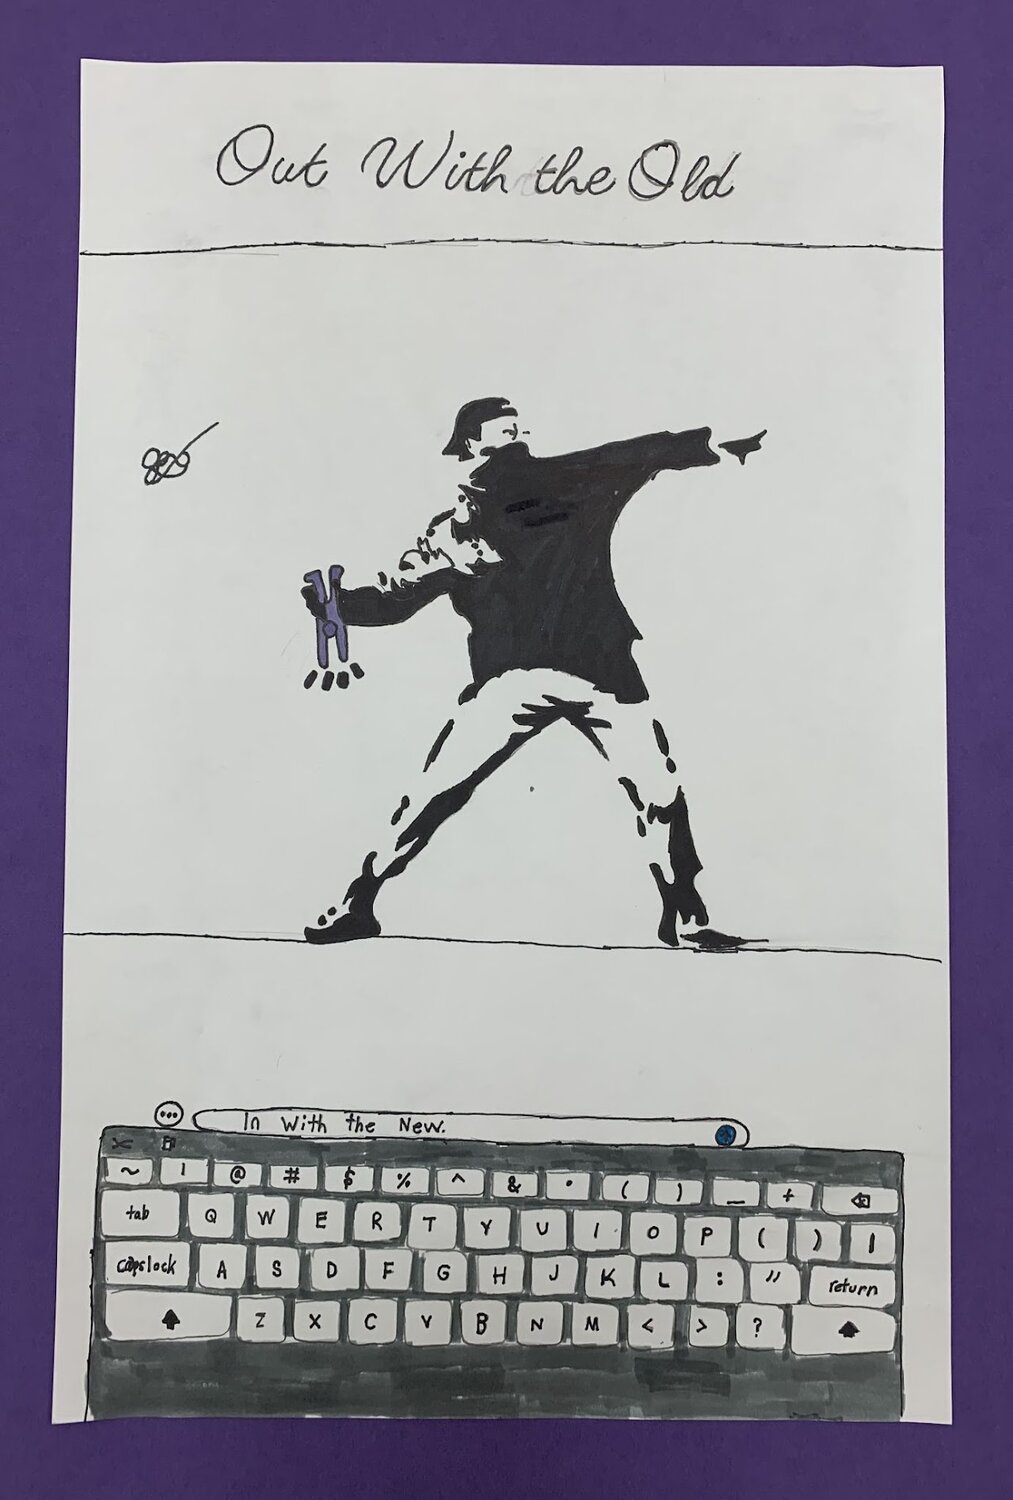 South Side Middle School art student Jack Clancy takes a page out of Banksy’s workbook with his design, “Out with the Old… In with the New.”